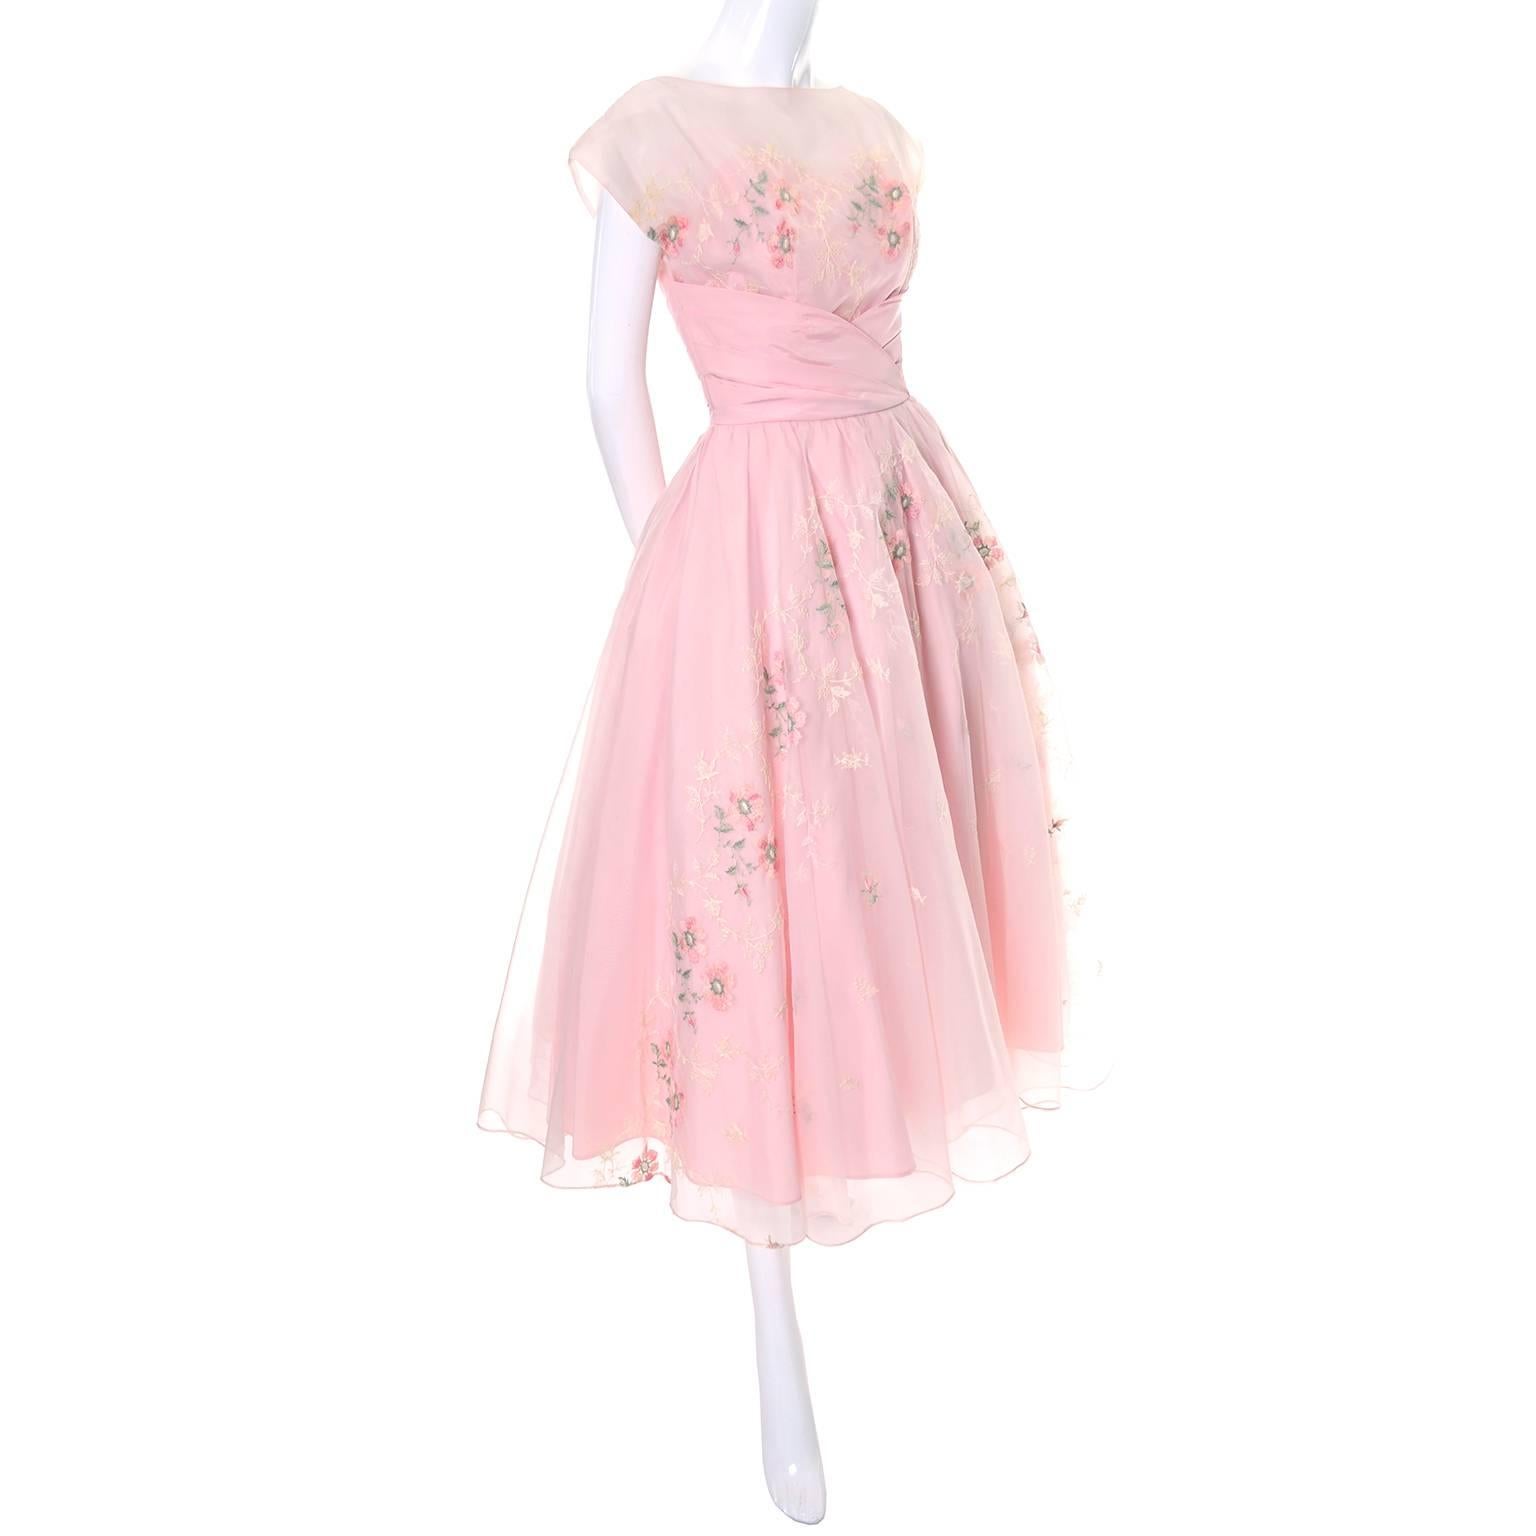 This dreamy vintage dress is in as new condition and was made in the 1950's.  You can twirl on the dance floor for house in this pretty vintage dress.  The dress is pink organza with satin trim and satin lining and it has a back zipper.  There are 2